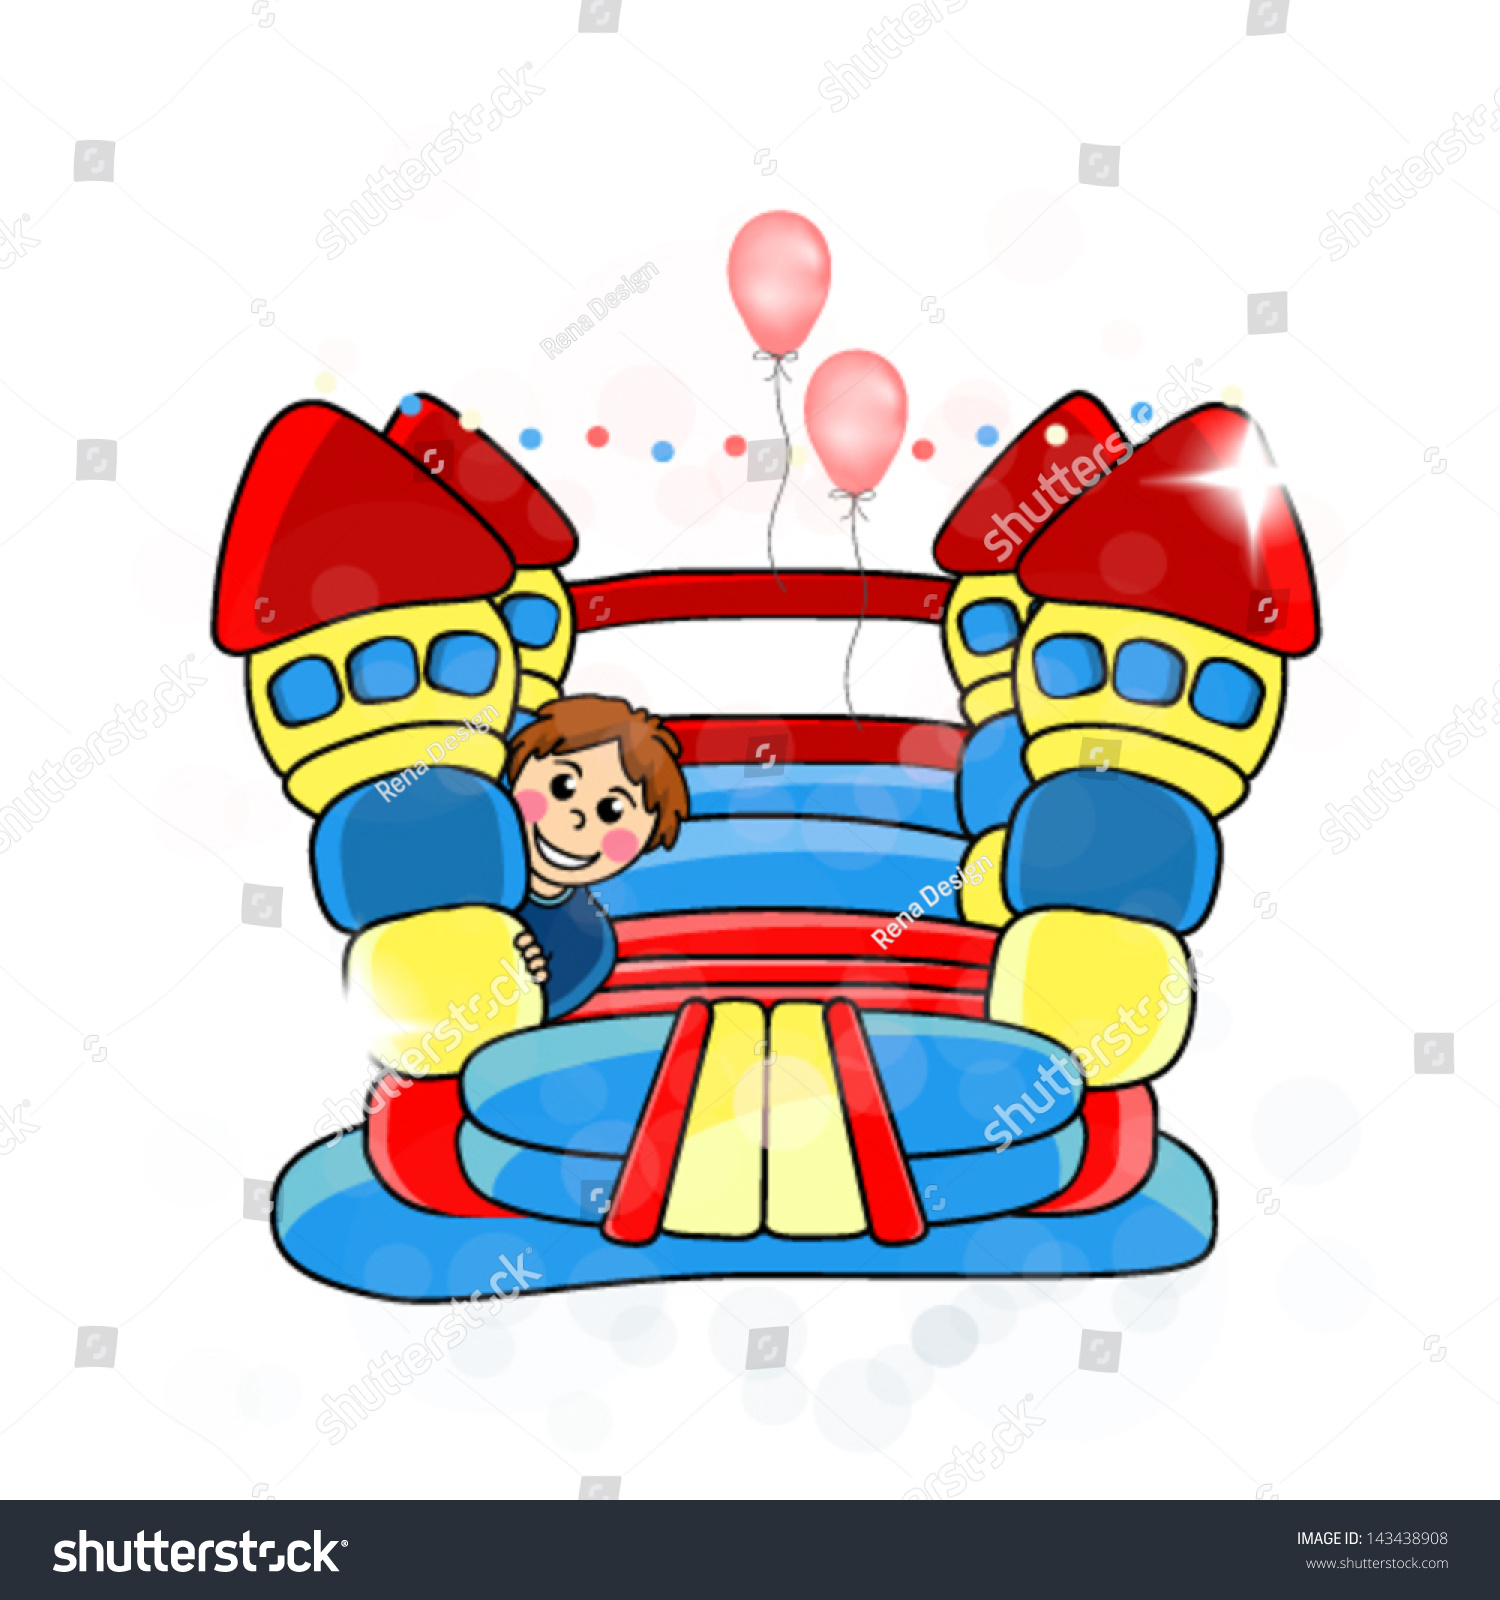 jumping castle clipart - photo #32